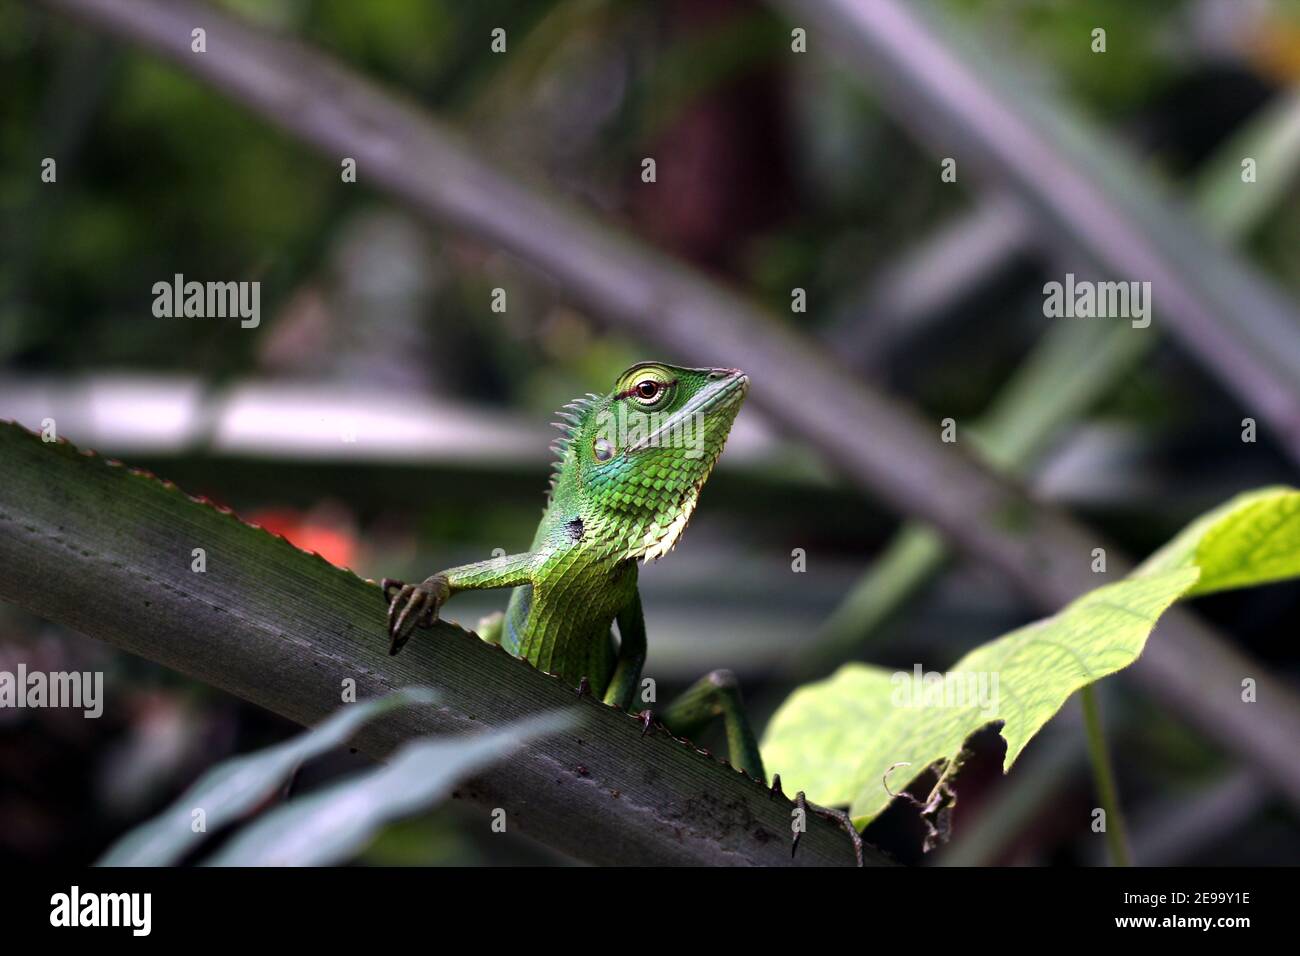 Colorful green lizard looking curious while laying on pineapple leaf Stock Photo